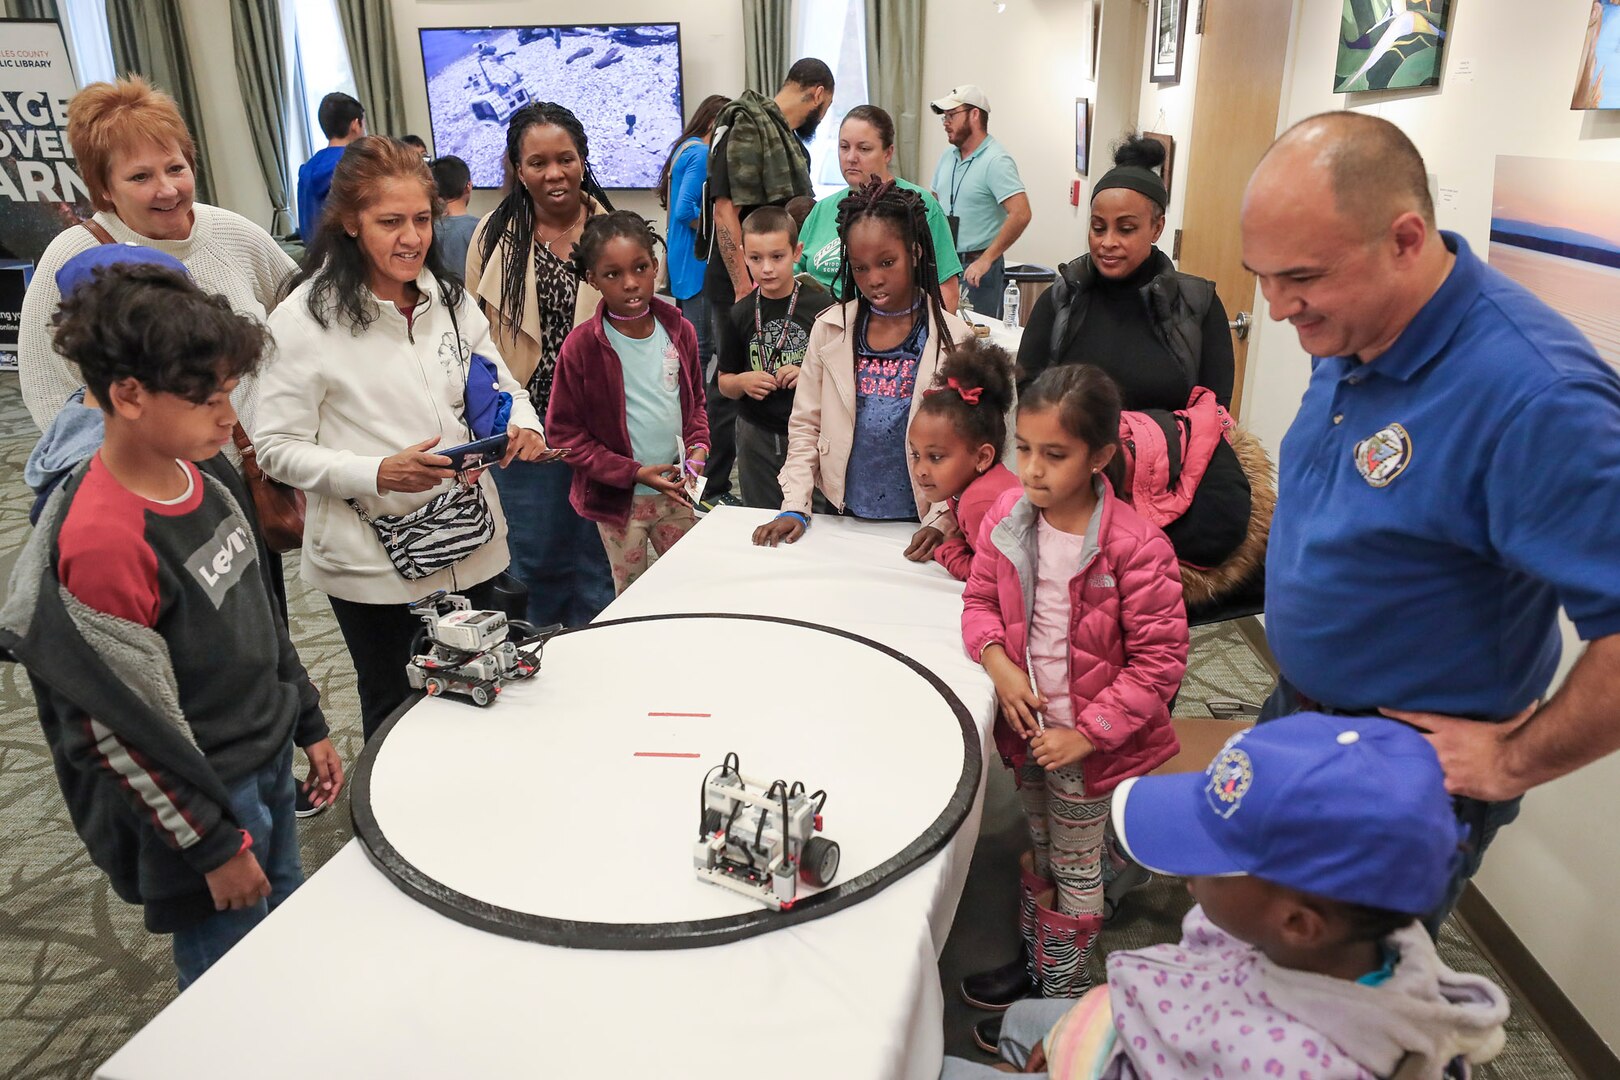 NSWC IHEODTD engineer John Kilikewich of the CAD/PAD Division looks on as students and parents watch Lego robots autonomously sumo wrestle at the STEM Fest event held at Waldorf West Public Library, Oct. 26 .  (U.S. Navy photo by Matthew Poynor)